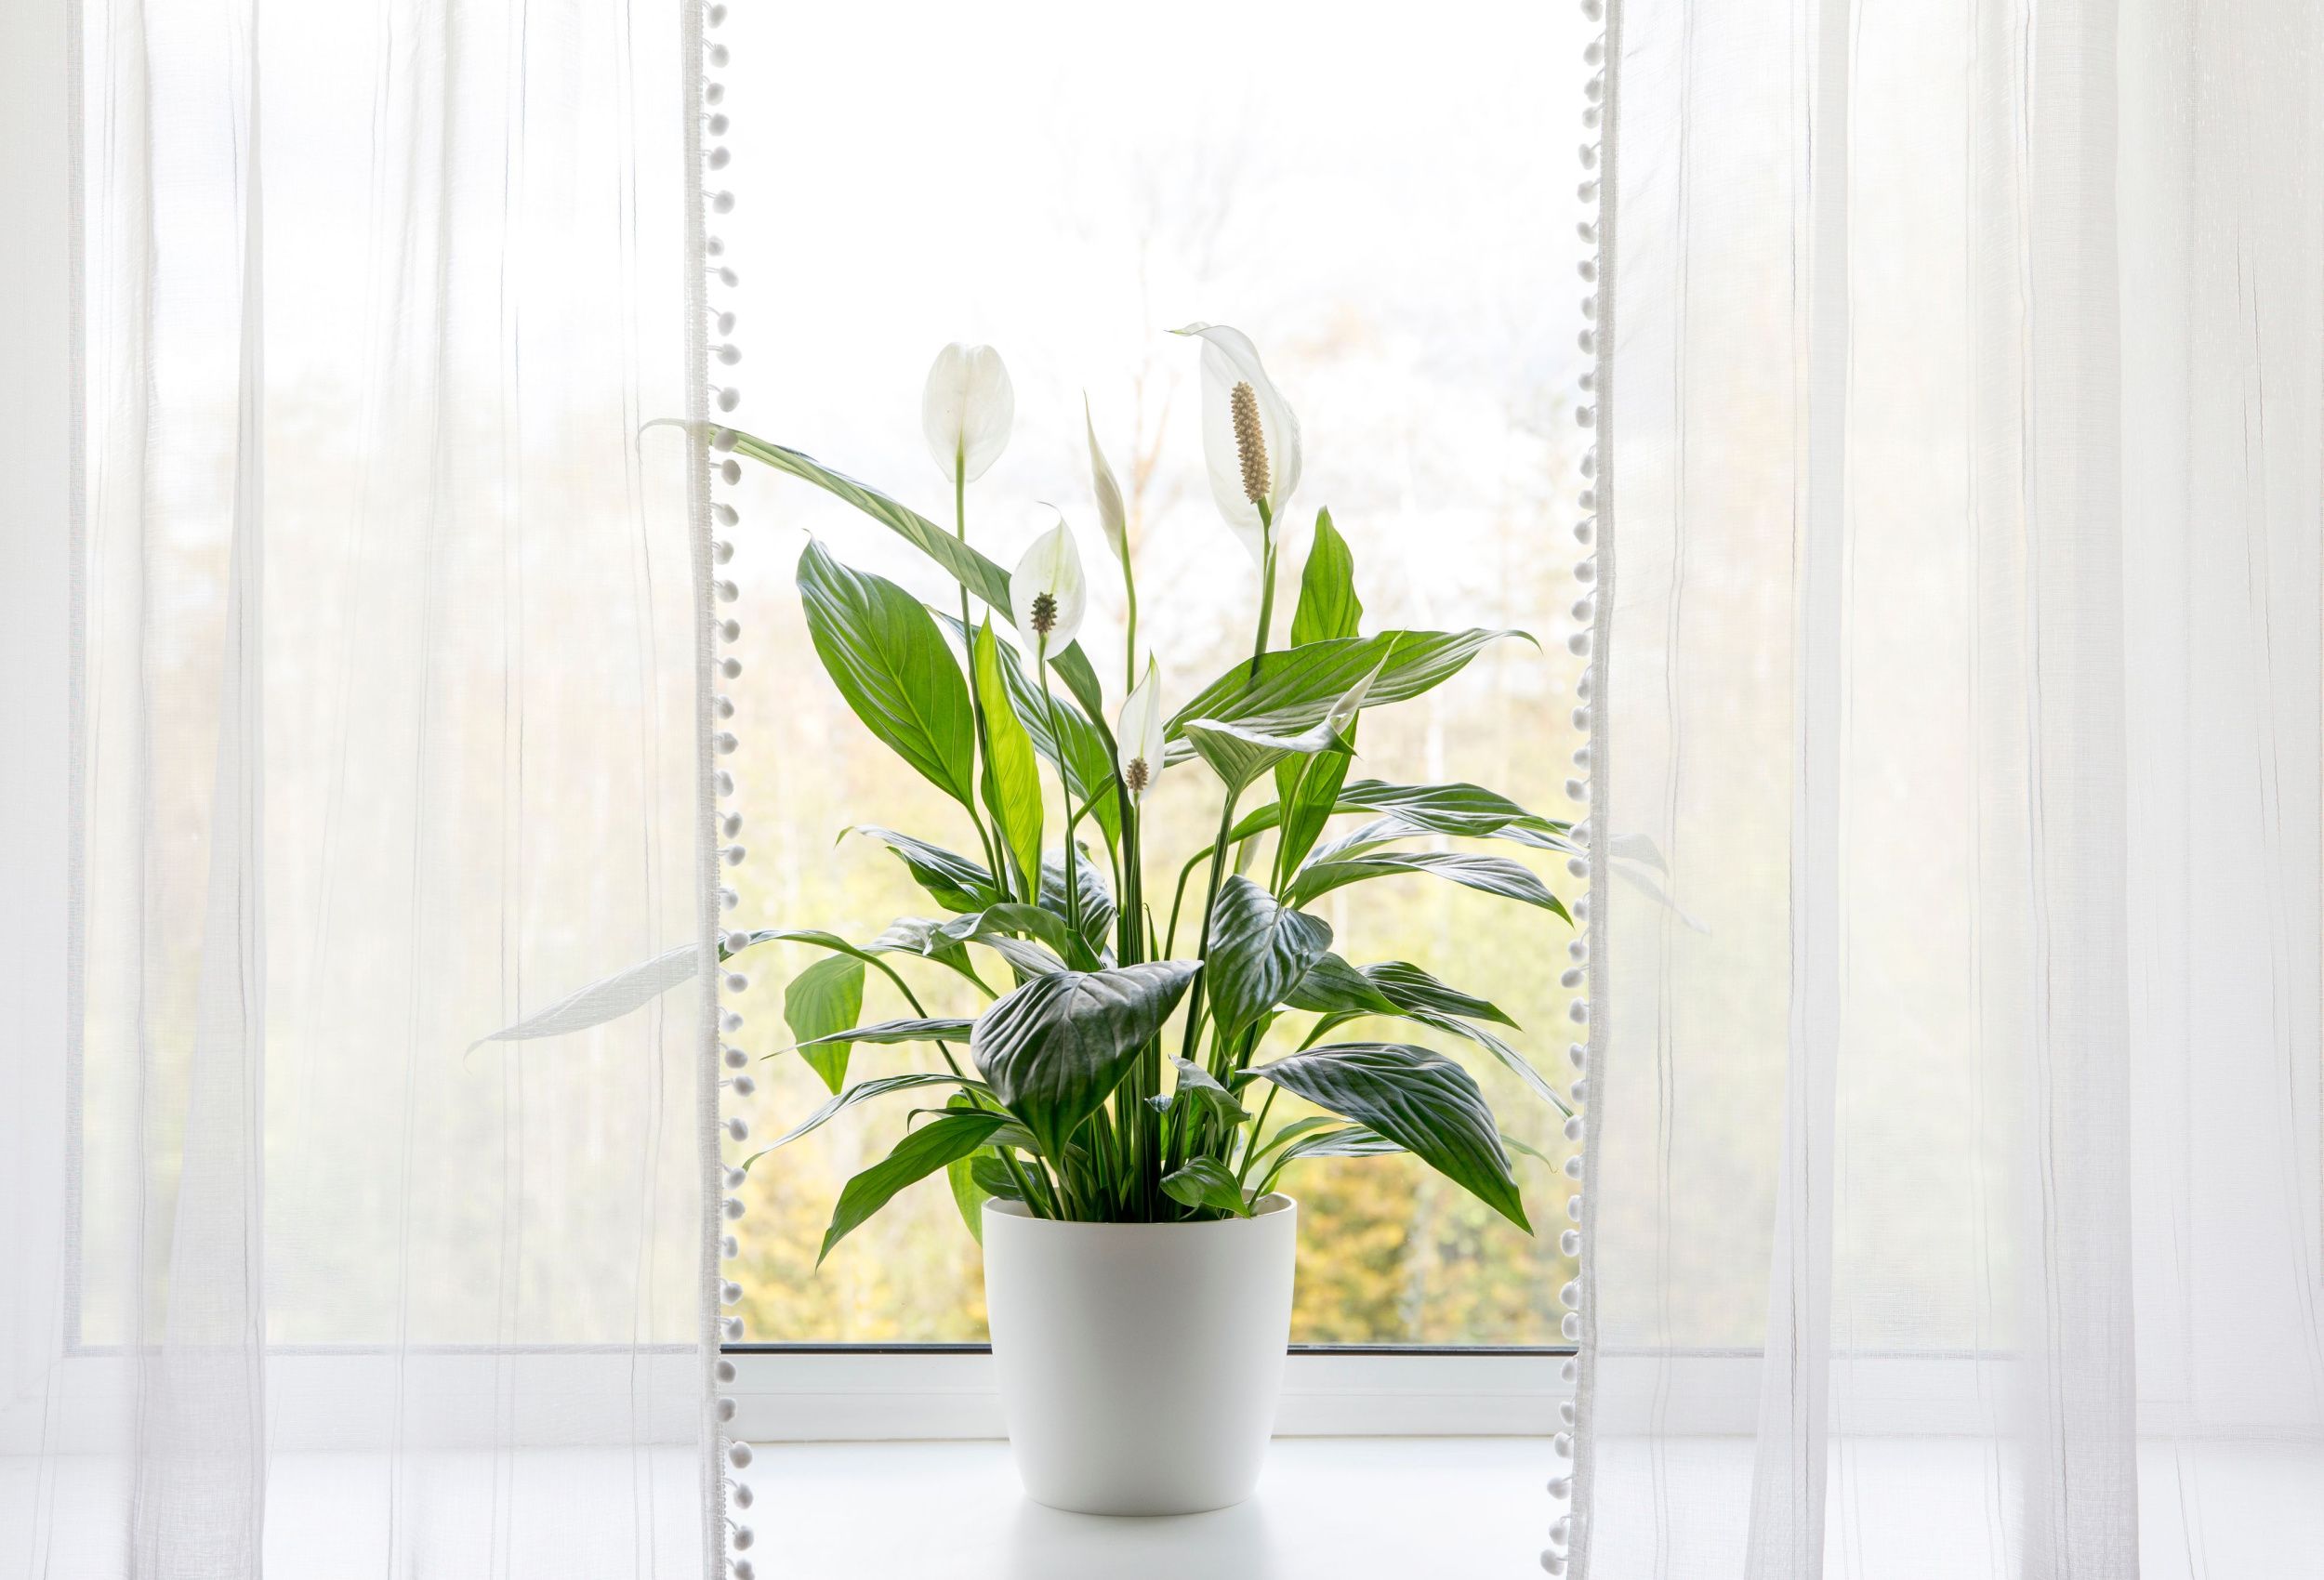 Air puryfing house plants in home concept.